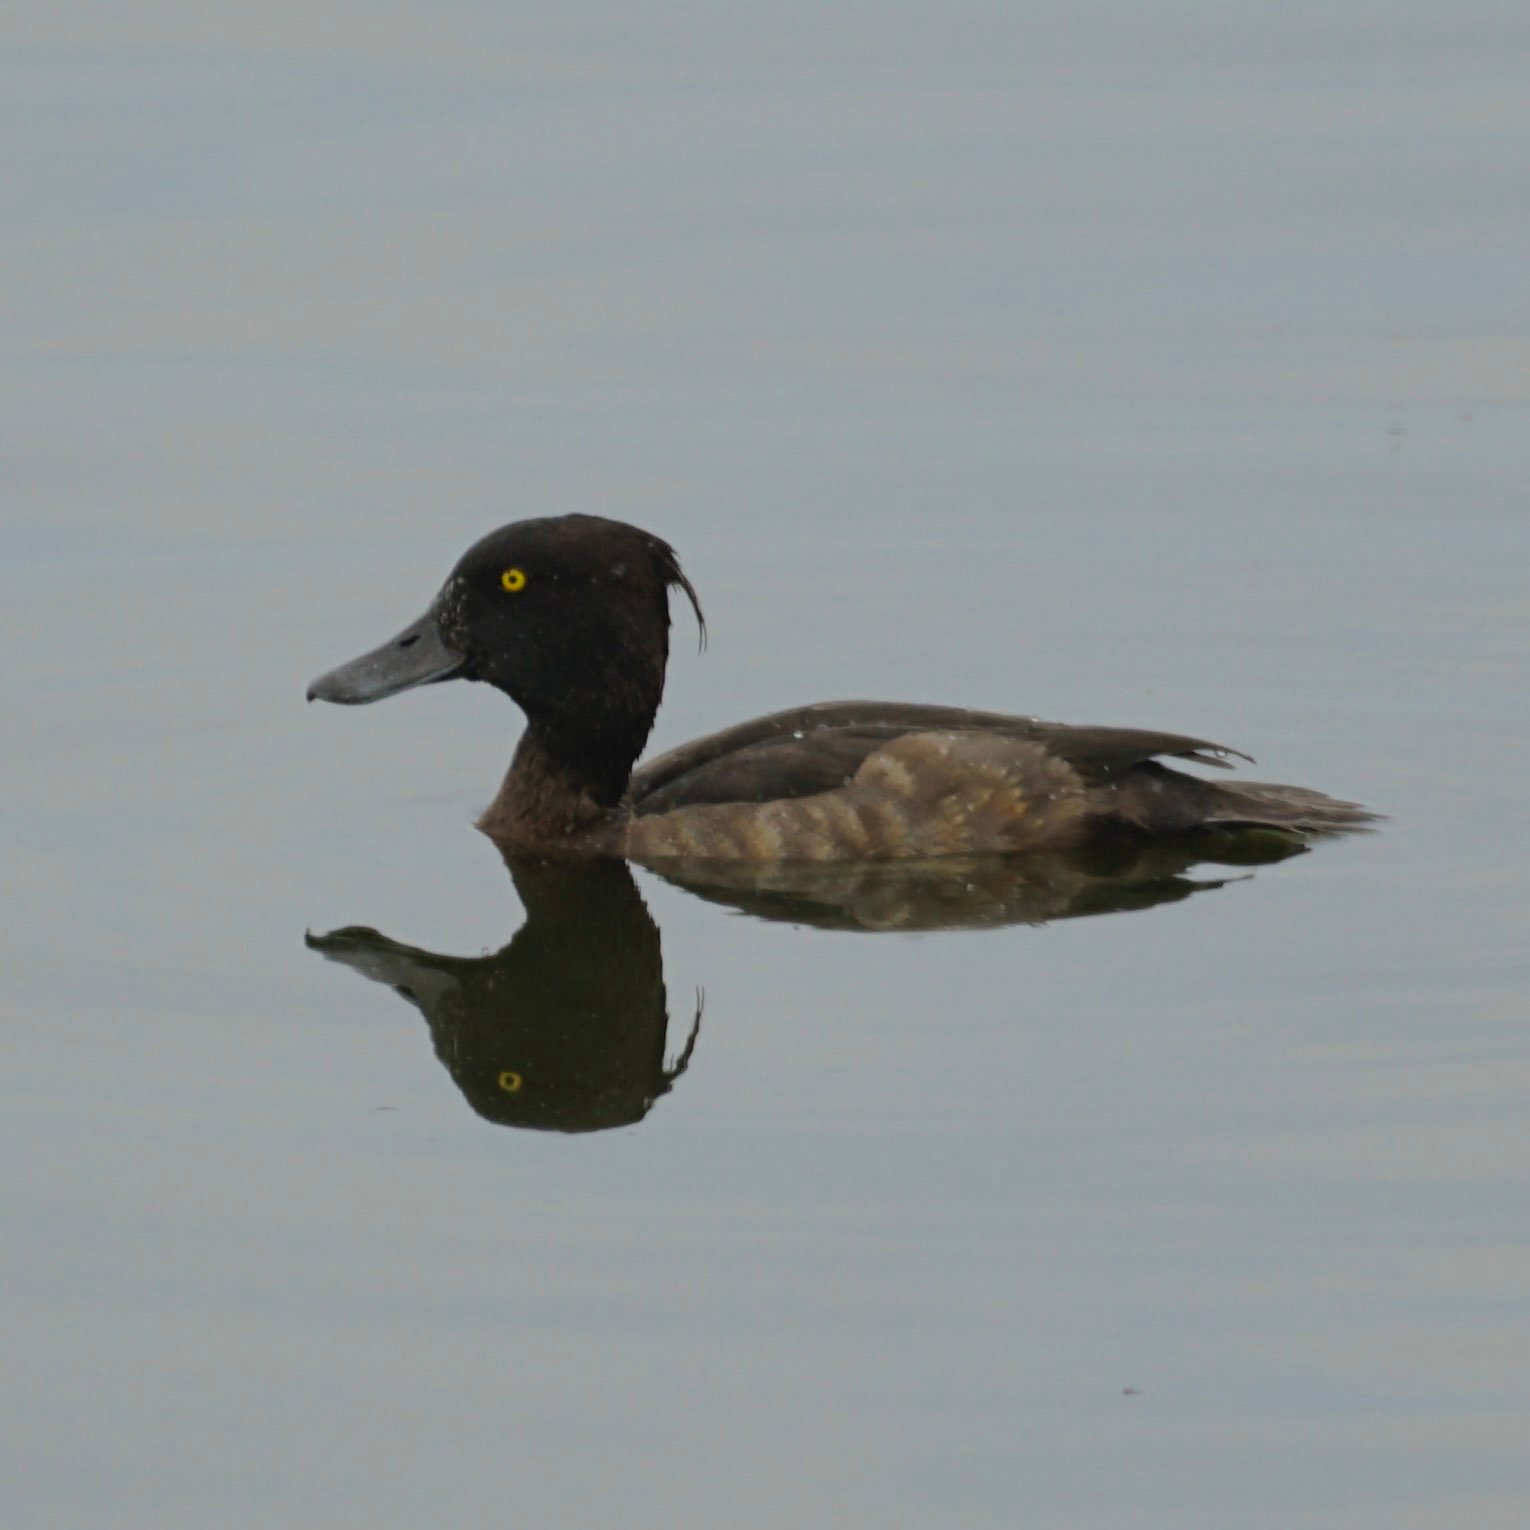 Another tufted duck, this one has a tuft.